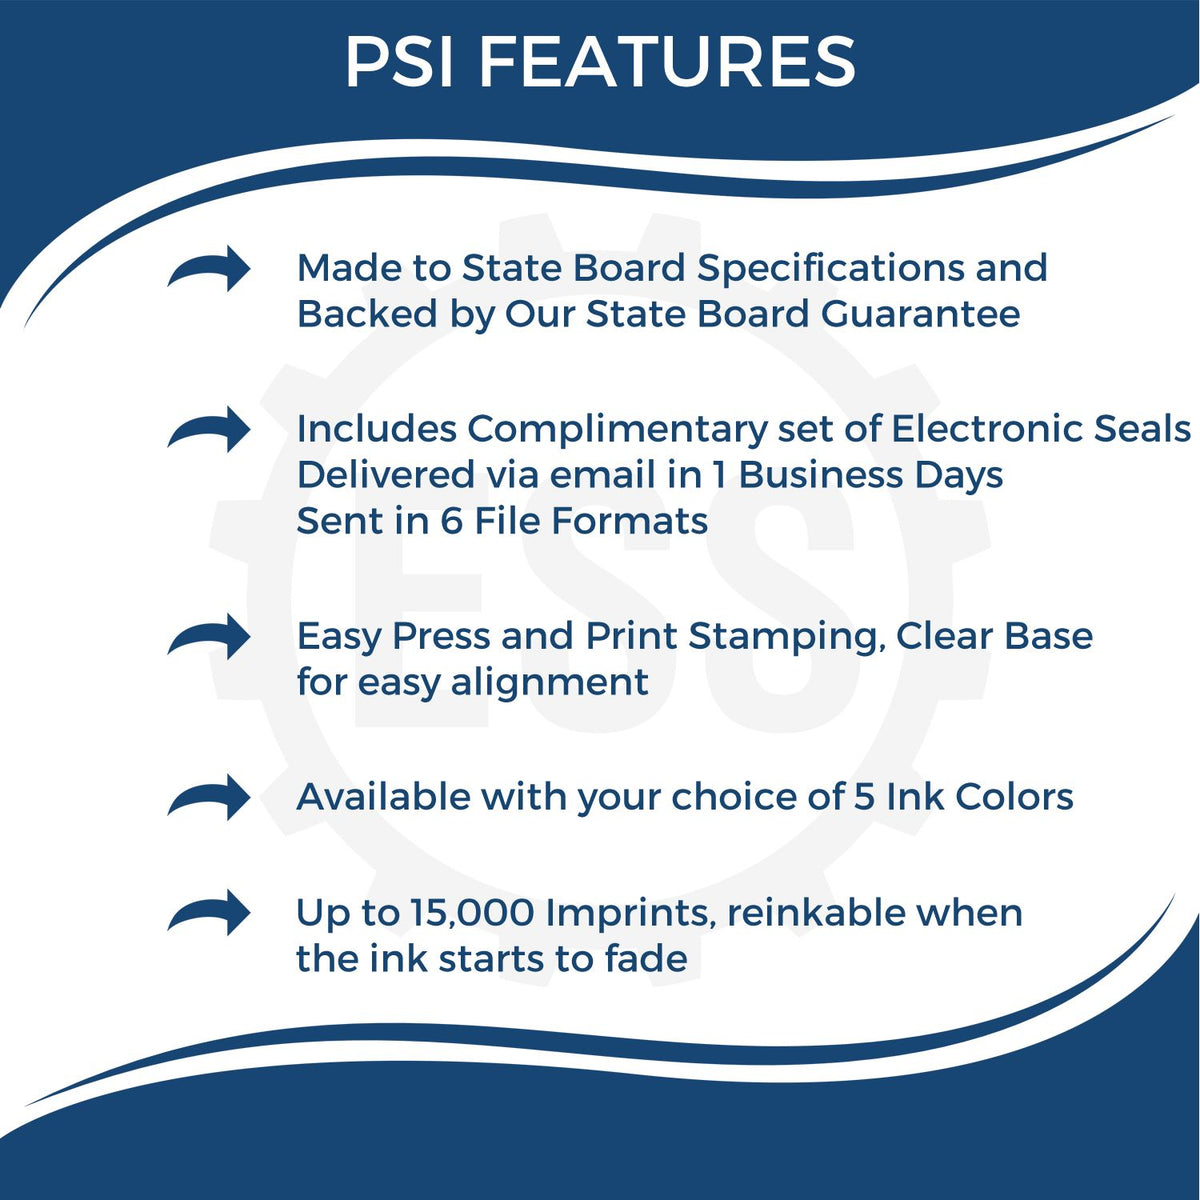 A picture of an infographic highlighting the selling points for the PSI New Hampshire Notary Stamp